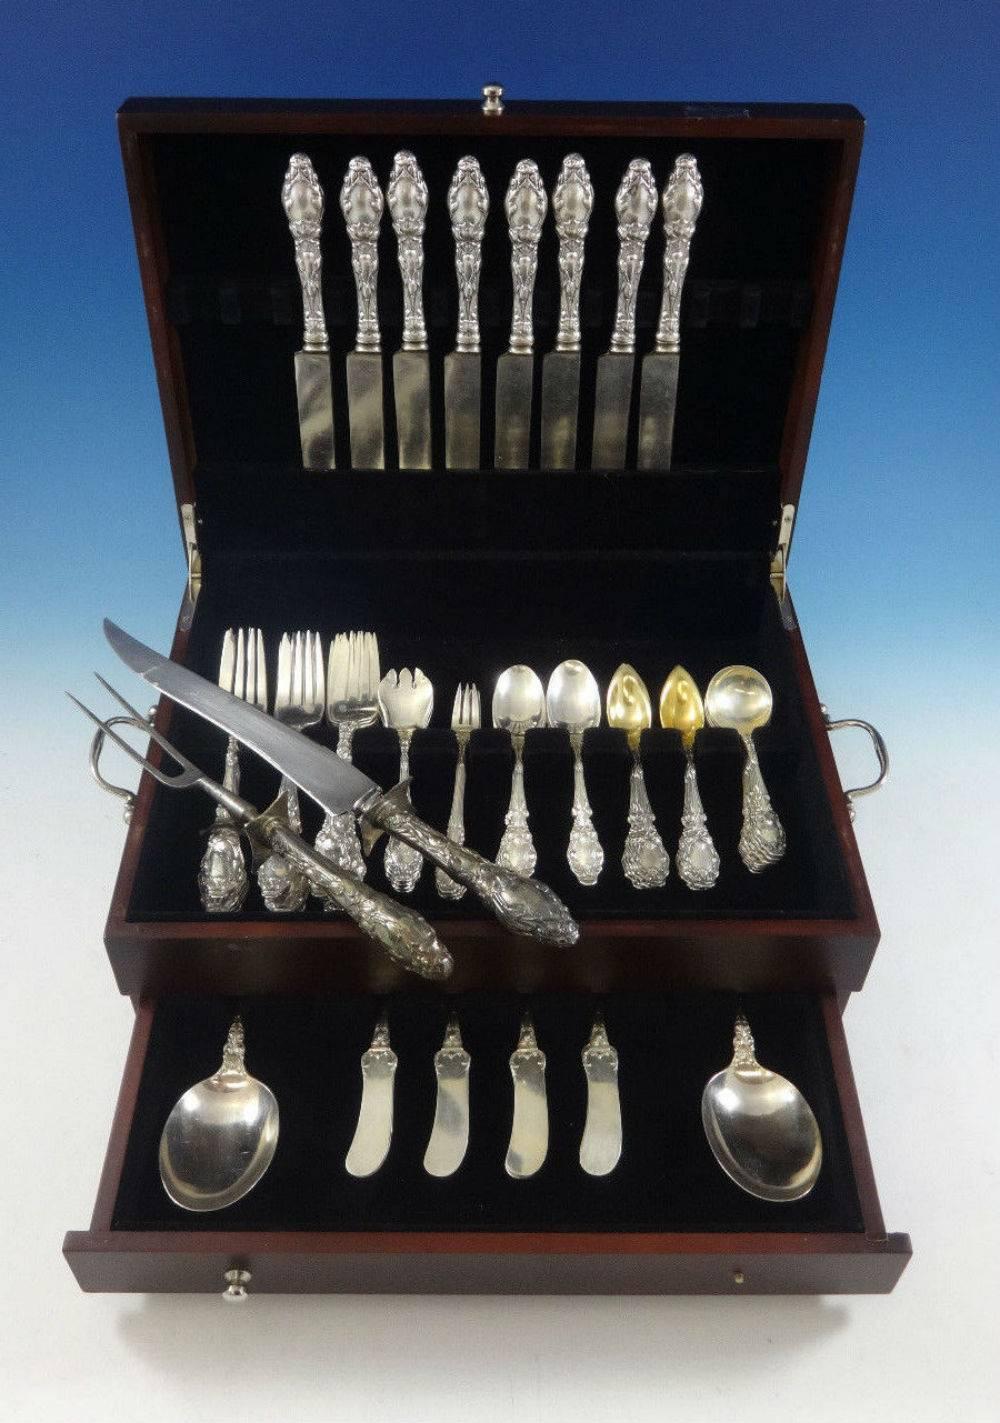 Dinner size Virginiana by Gorham sterling silver Art Nouveau flatware set of 76 pieces. This set includes: 

Eight dinner size knives, with blunt stainless replaced blades, 9 3/4